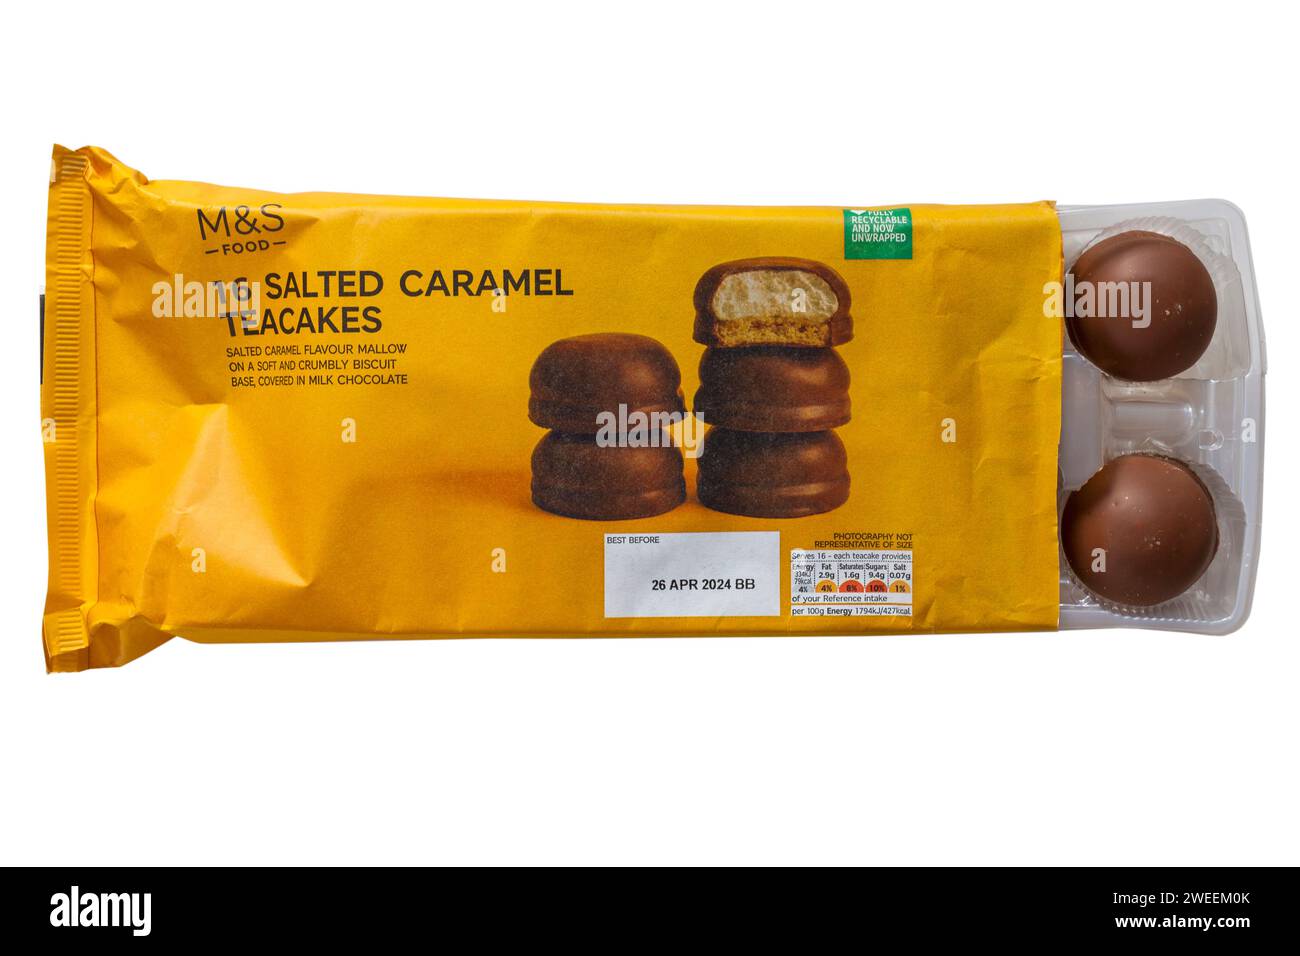 Pack of 16 Salted Caramel Teacakes from M&S opened to show contents isolated on white background Stock Photo